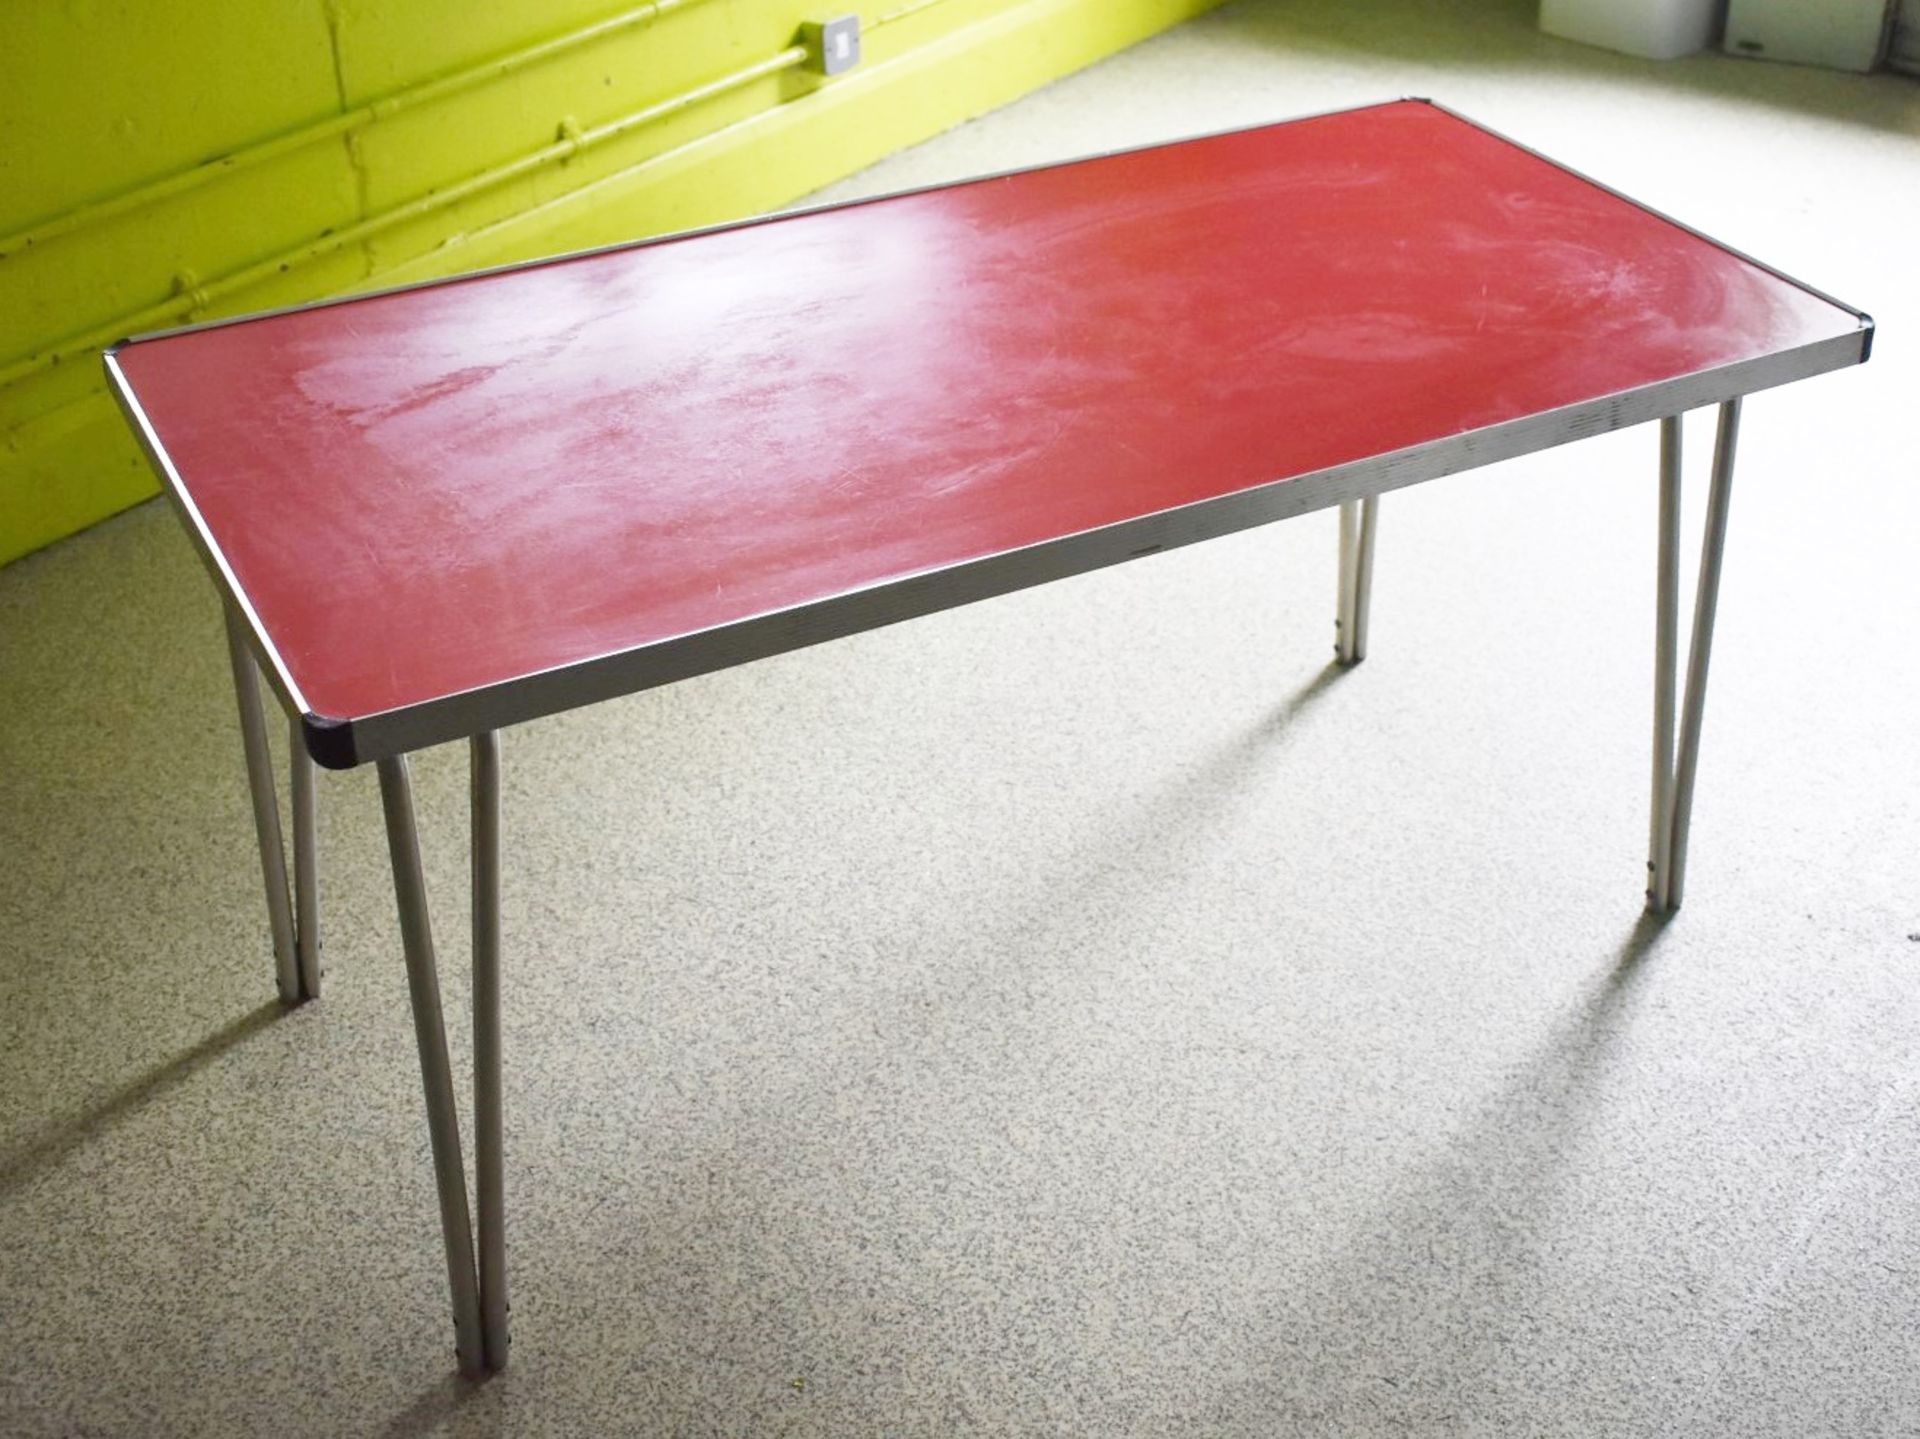 12 x Folding Stacking Tables With Coloured Tops and Chrome Edges - H59 x W120 x D60 cms - Ref